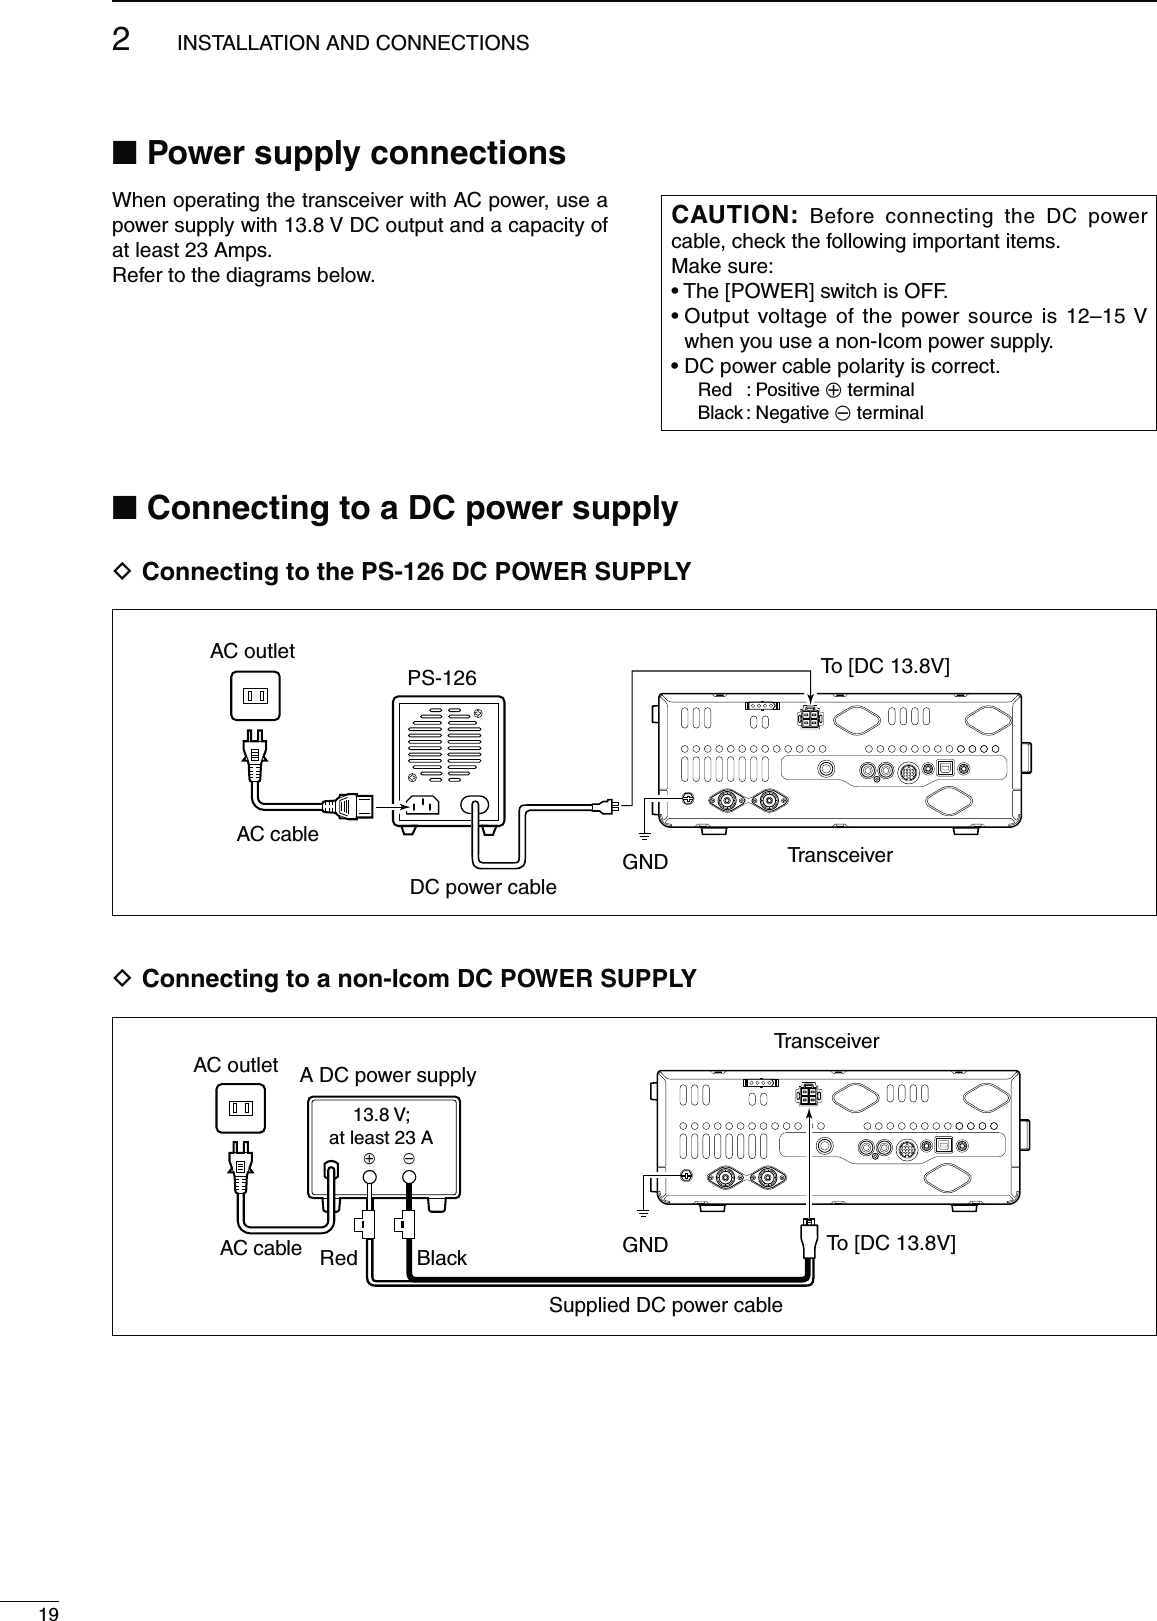 192INSTALLATION AND CONNECTIONSN0OWERSUPPLYCONNECTIONSWhen operating the transceiver with AC power, use a power supply with 13.8 V DC output and a capacity of at least 23 Amps.Refer to the diagrams below.#!54)/. Before connecting the DC power cable, check the following important items.Make sure:s4HE;0/7%2=SWITCHIS/&amp;&amp;s/UTPUTVOLTAGEOFTHEPOWERSOURCEISn6when you use a non-Icom power supply.s$#POWERCABLEPOLARITYISCORRECT Red : Positive + terminal Black : Negative _ terminalTransceiverGNDPS-126AC cableAC outlet To [DC 13.8V]+_Supplied DC power cableDC power cableD#ONNECTINGTOTHE03$#0/7%23500,9D#ONNECTINGTOANON)COM$#0/7%23500,9AC cableAC outletTransceiverGNDA DC power supply13.8 V;at least 23 ARed Black To [DC 13.8V]N#ONNECTINGTOA$#POWERSUPPLY